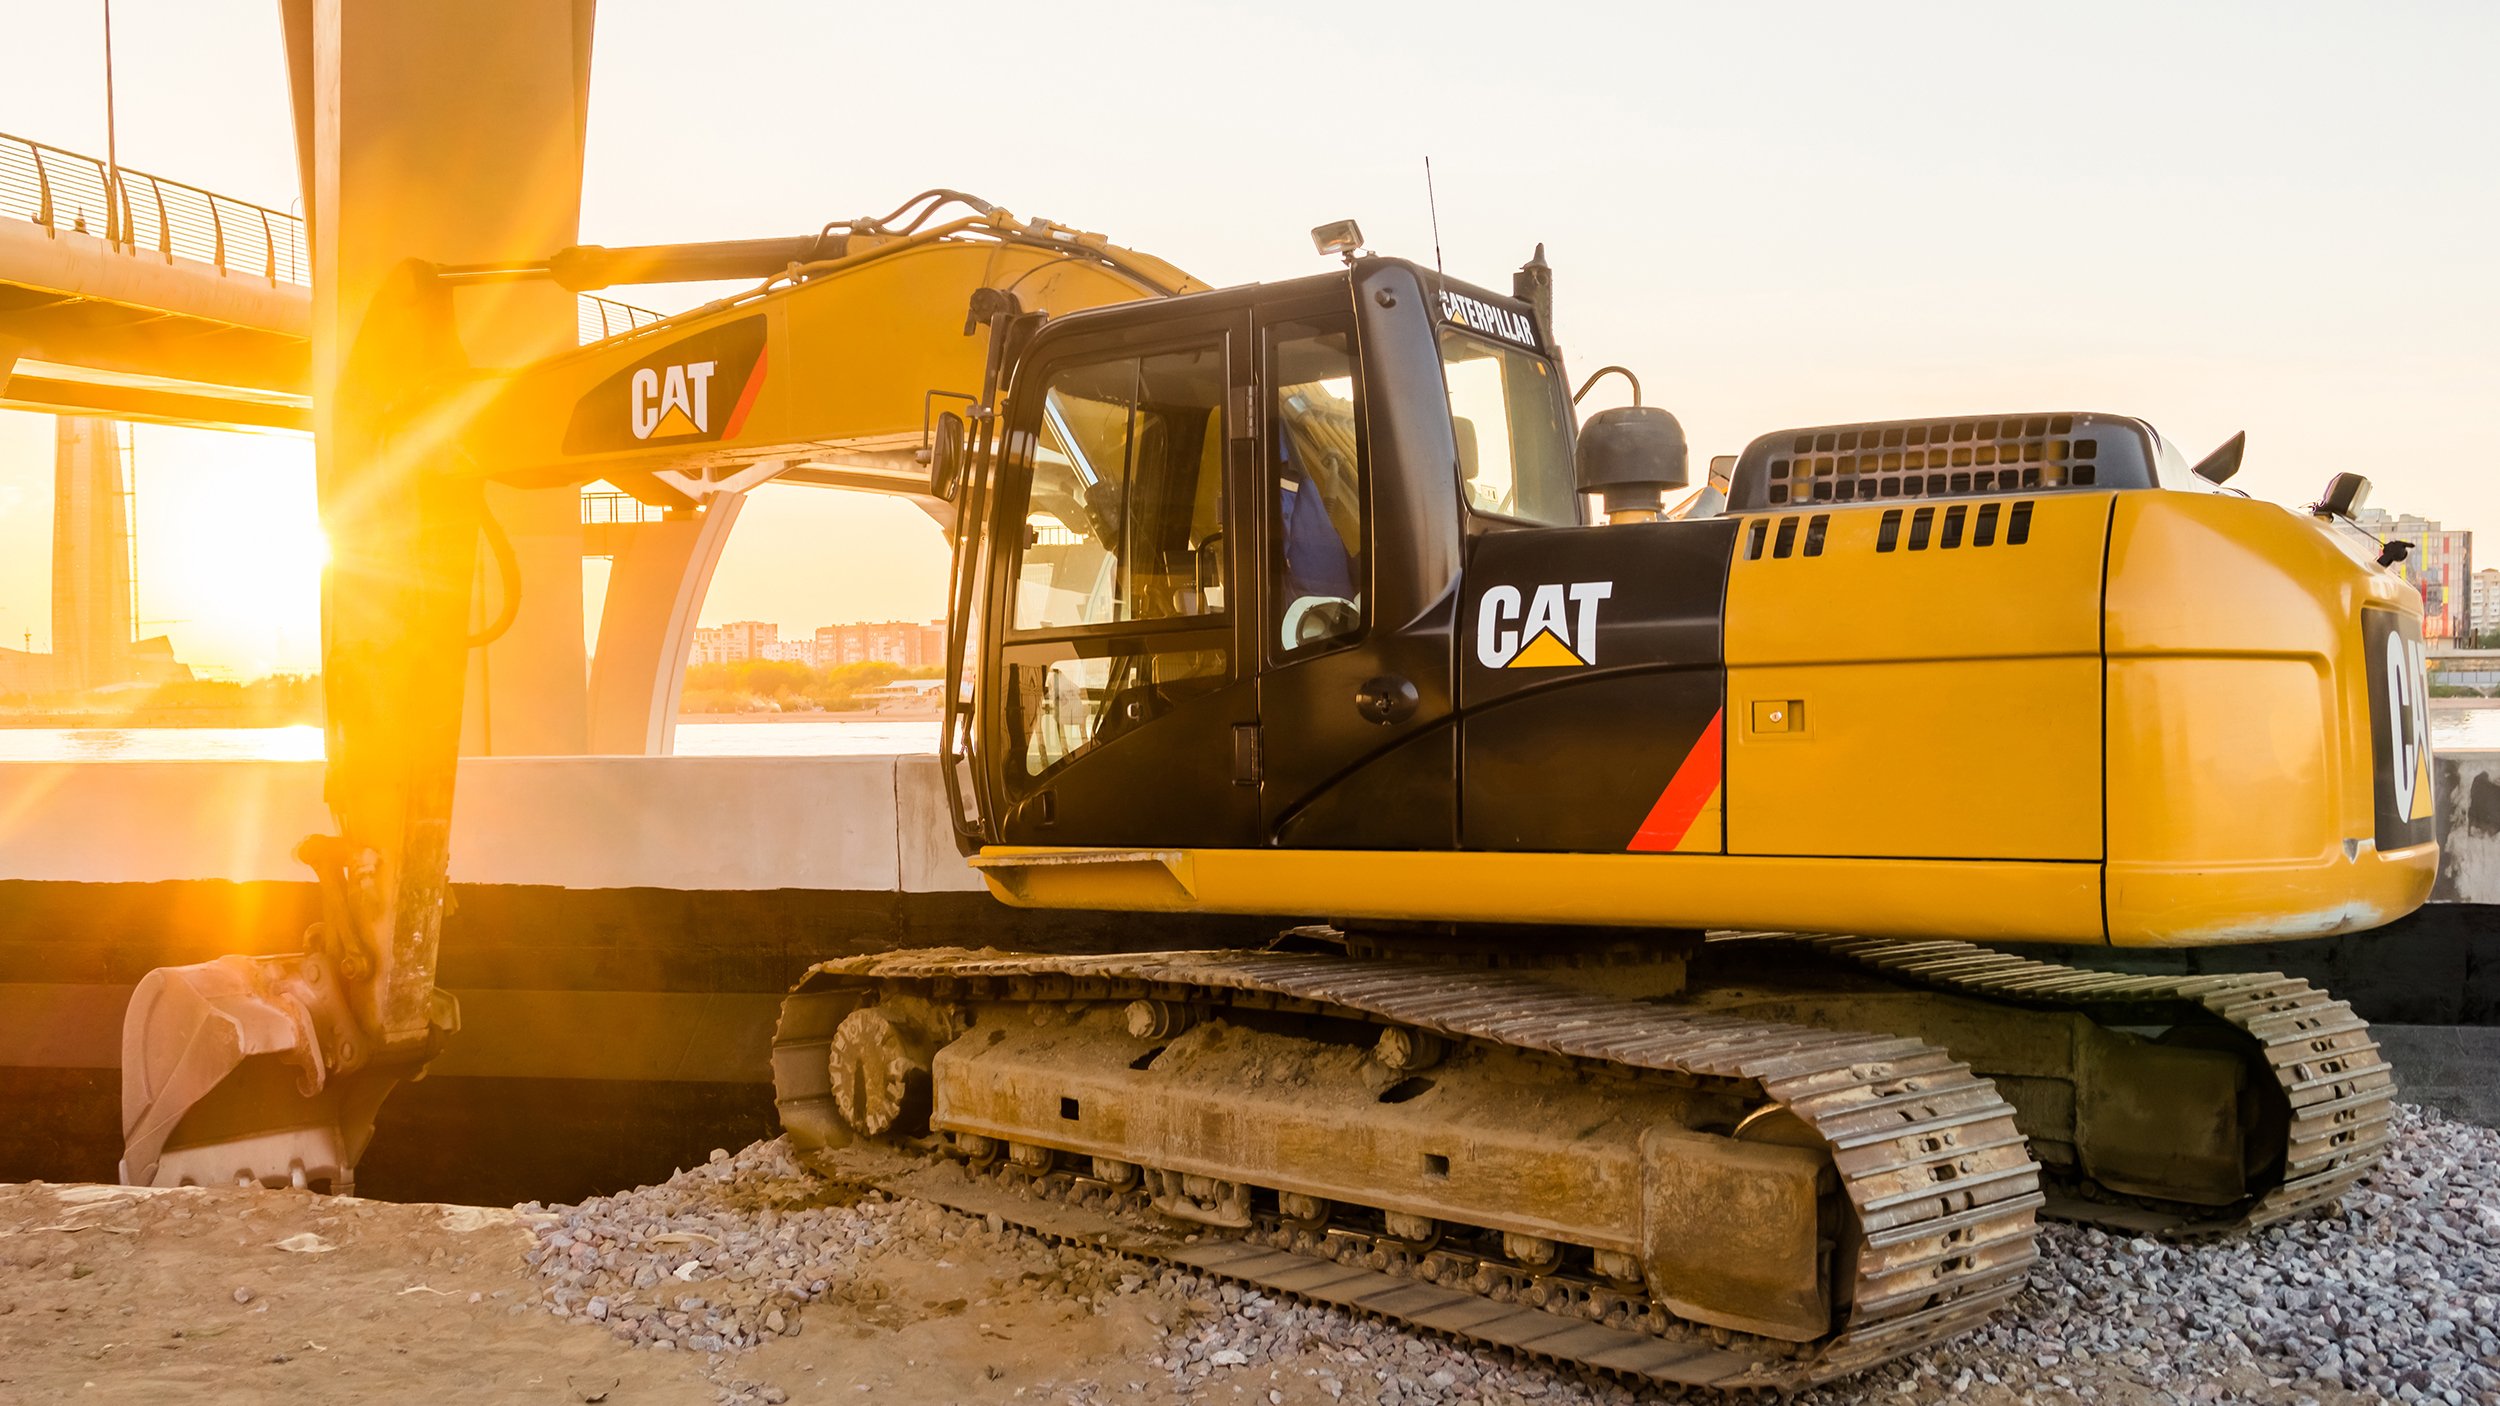 Construction of street of new emankment at St. Petersburg, Russia. Excavator CAT Caterpillar. Tractor with sunset shines. earthmoving, transportation. construction machinery